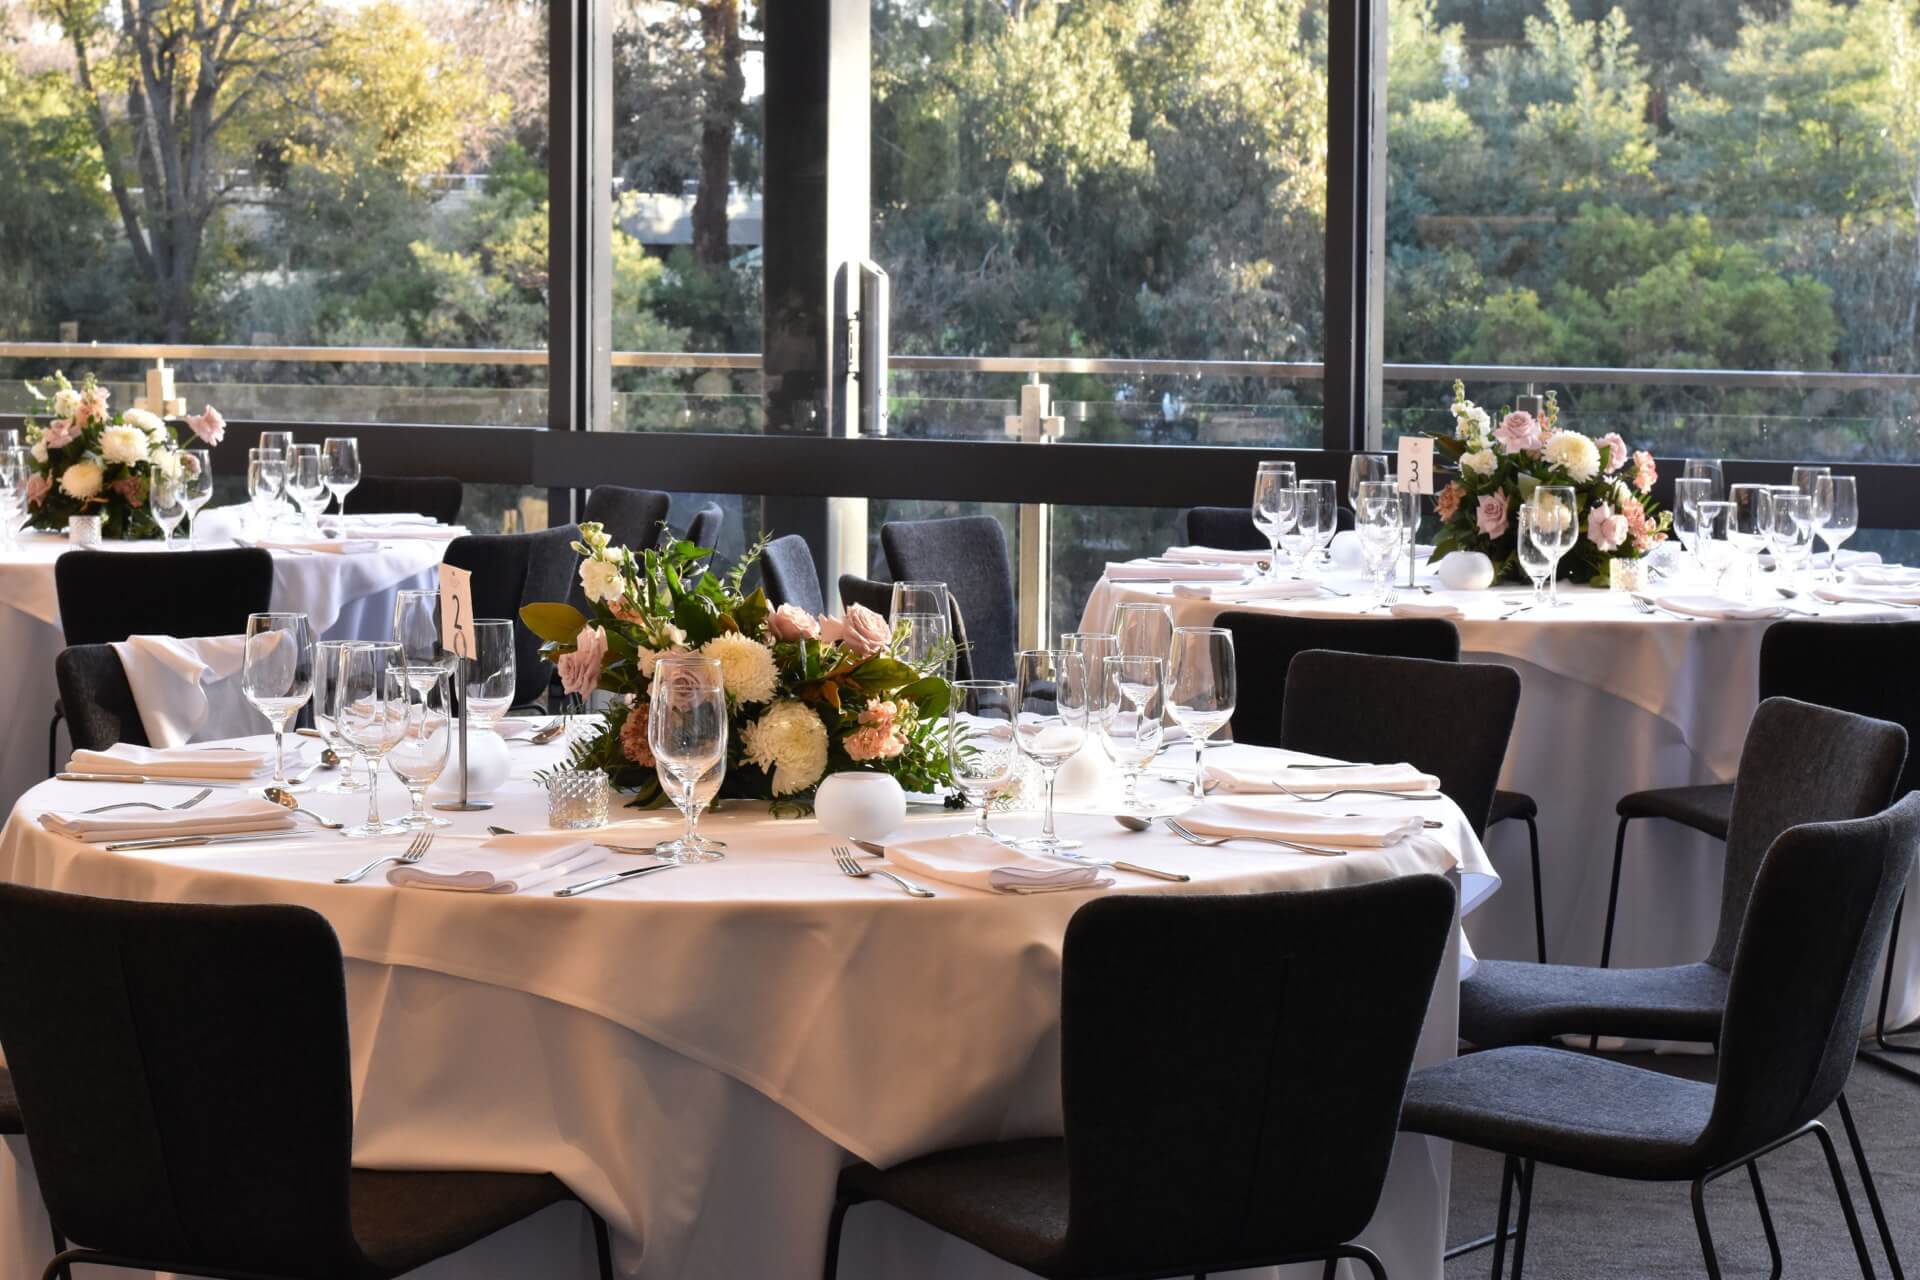 A beautifully decorated wedding venue with tables and chairs arranged for a special celebration.